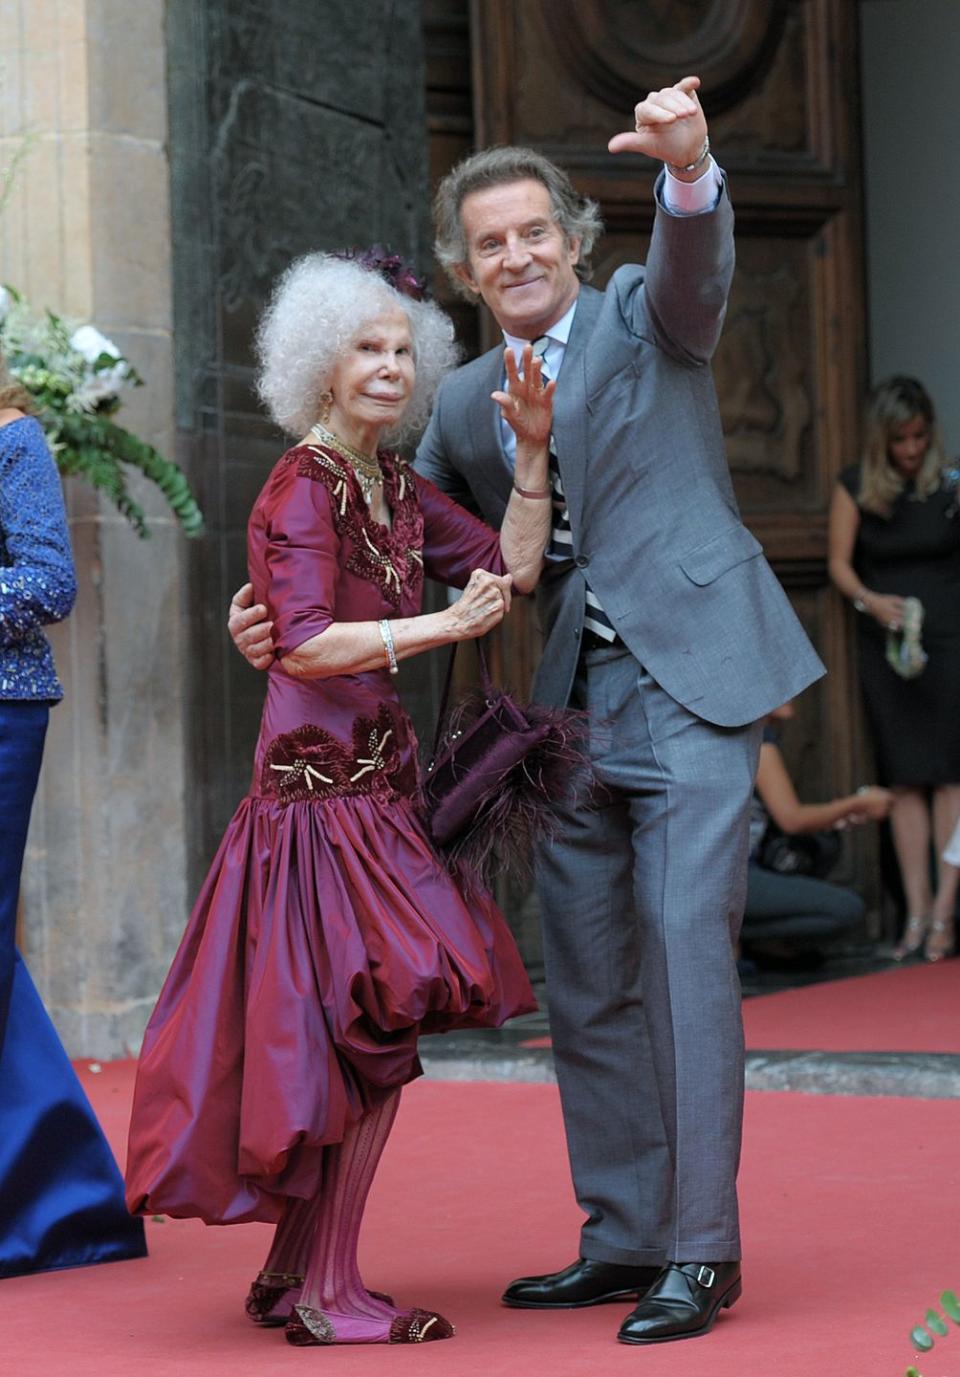 The Duchess of Alba married a much younger man.